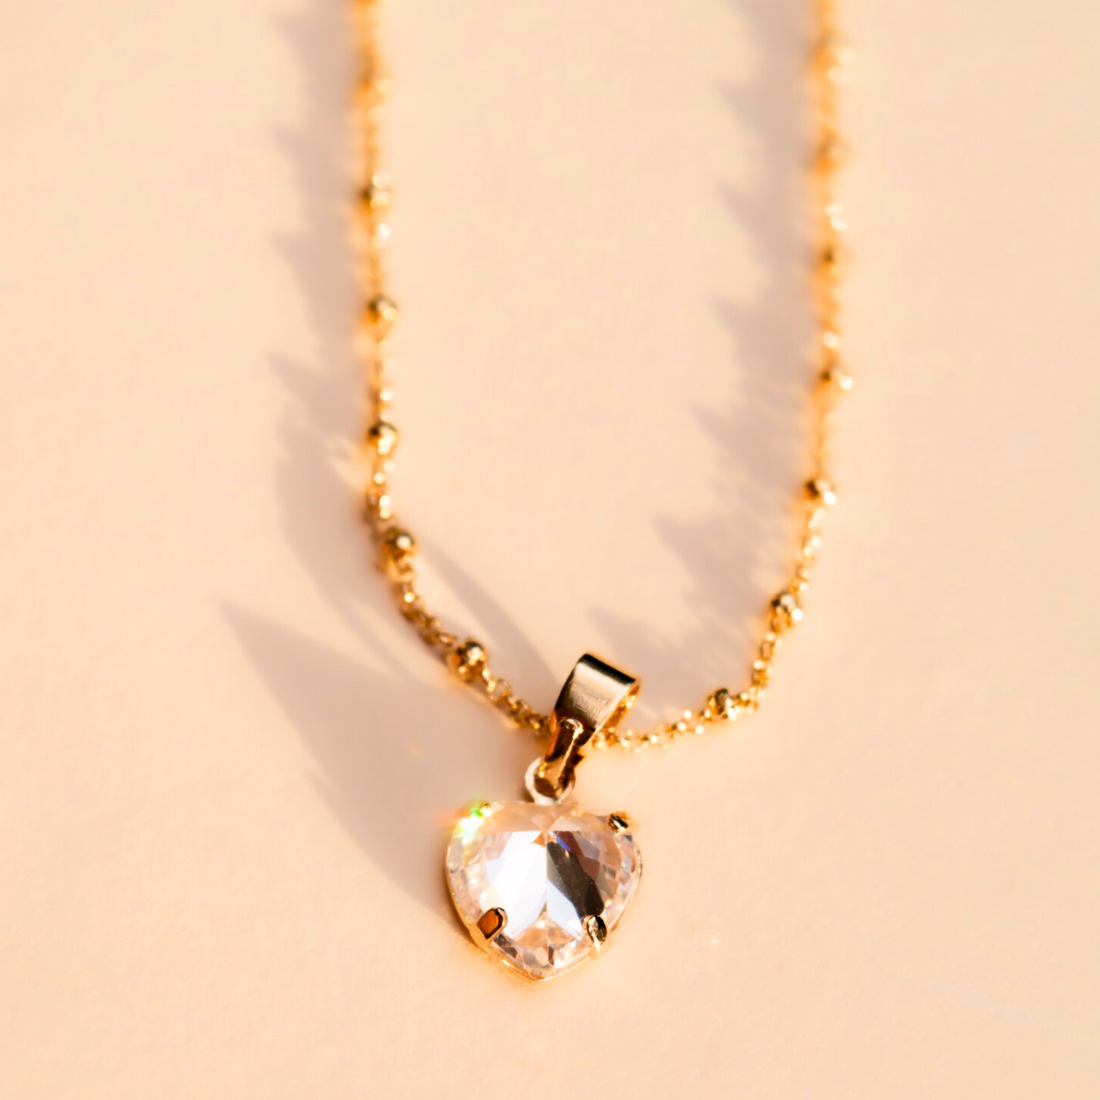 MCHARMS Dimond Heartfire Necklace Shop Jewelry at MCHARMS